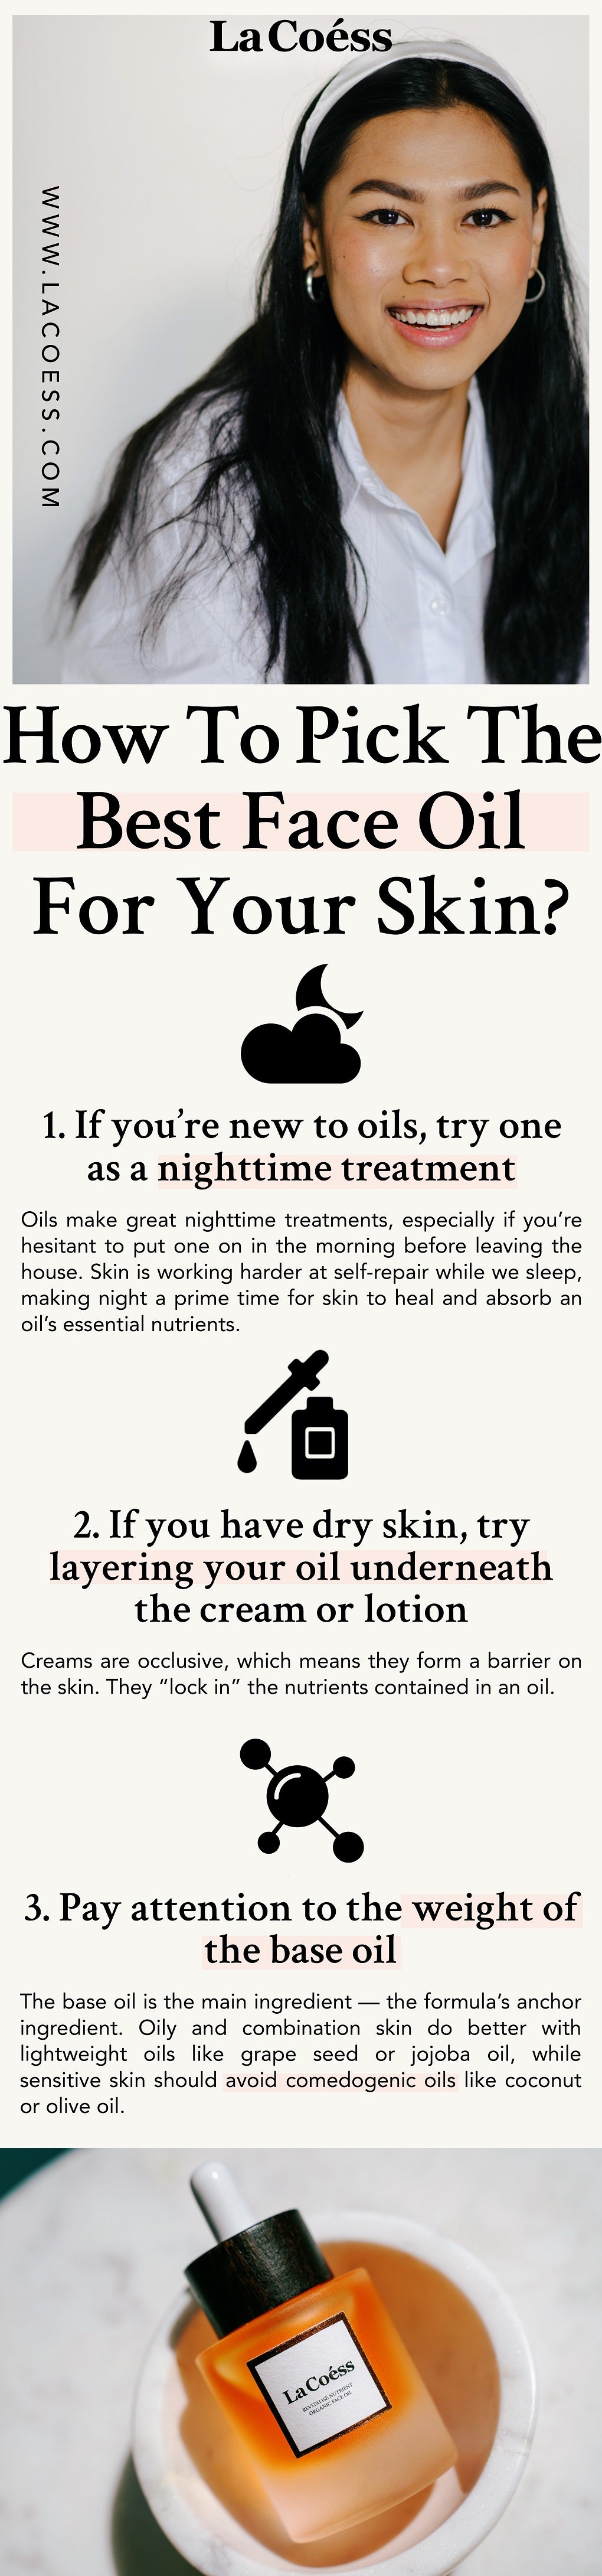 How To Pick The Best Face Oil for Your Skin?